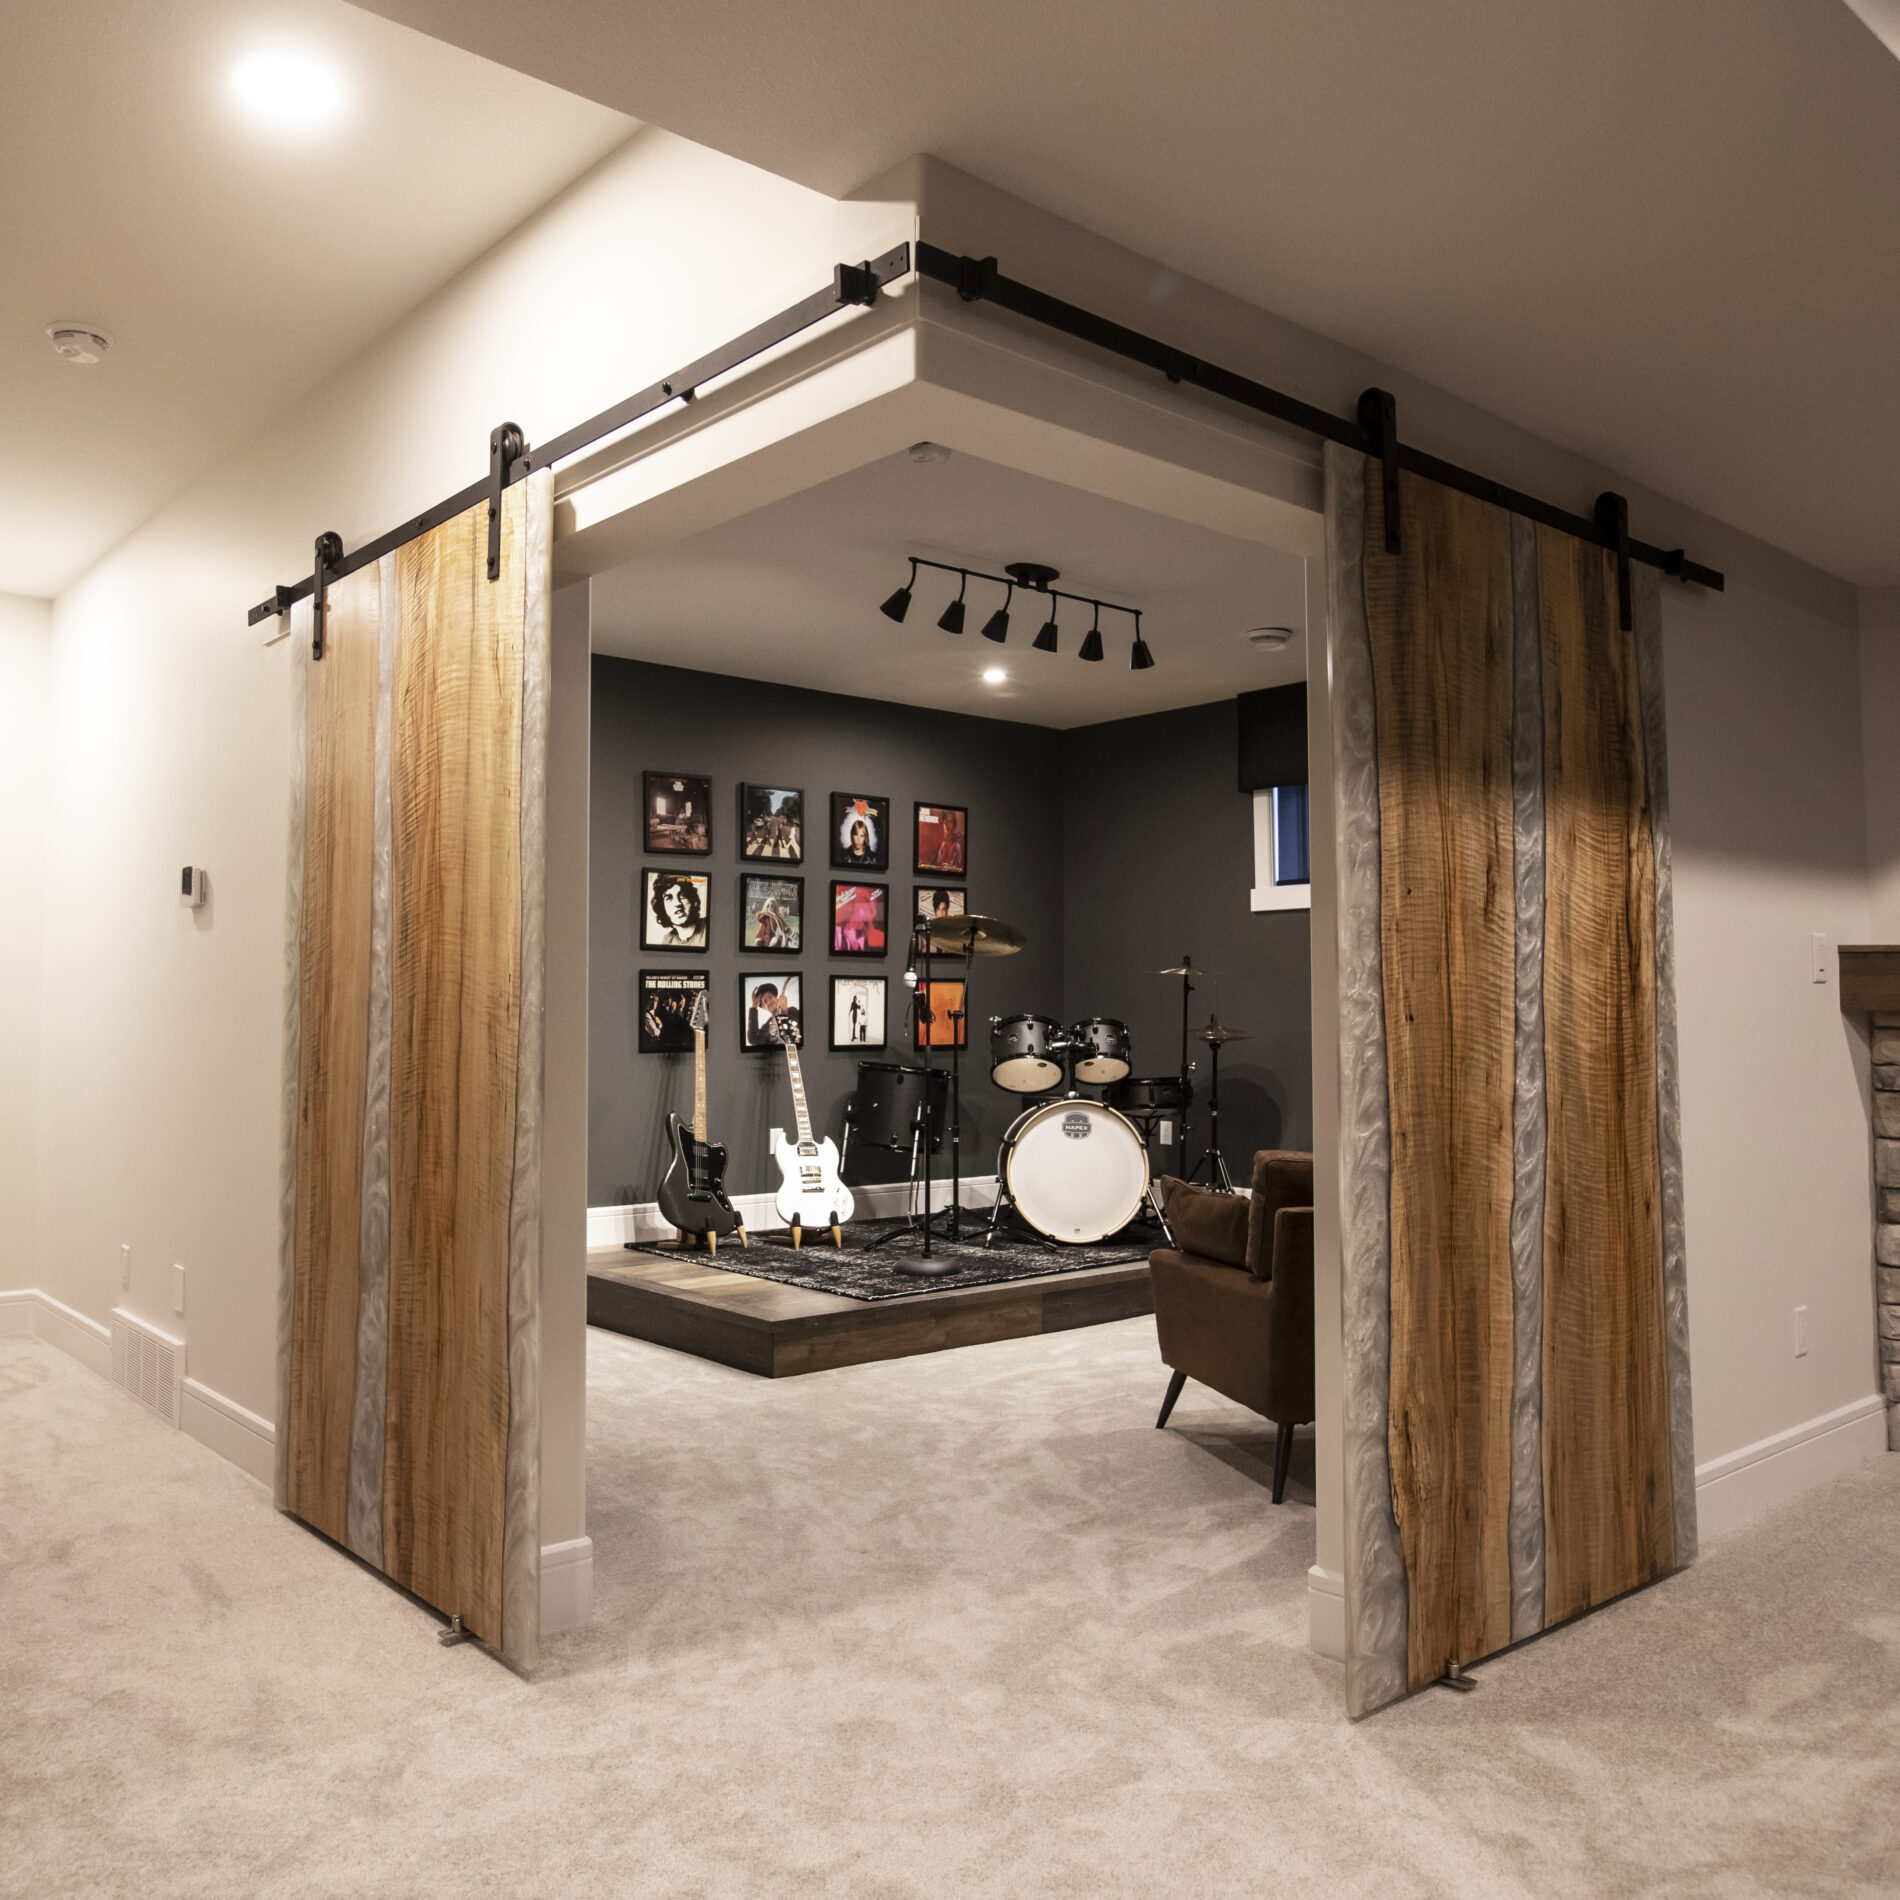 Two wood and epoxy barn doors opened to reveal a music room with dark walls, a stage in the corner, a drum set and guitar on the stage, a musical art collage hanging on the wall behind the instrument and two chairs across from the stage for viewing